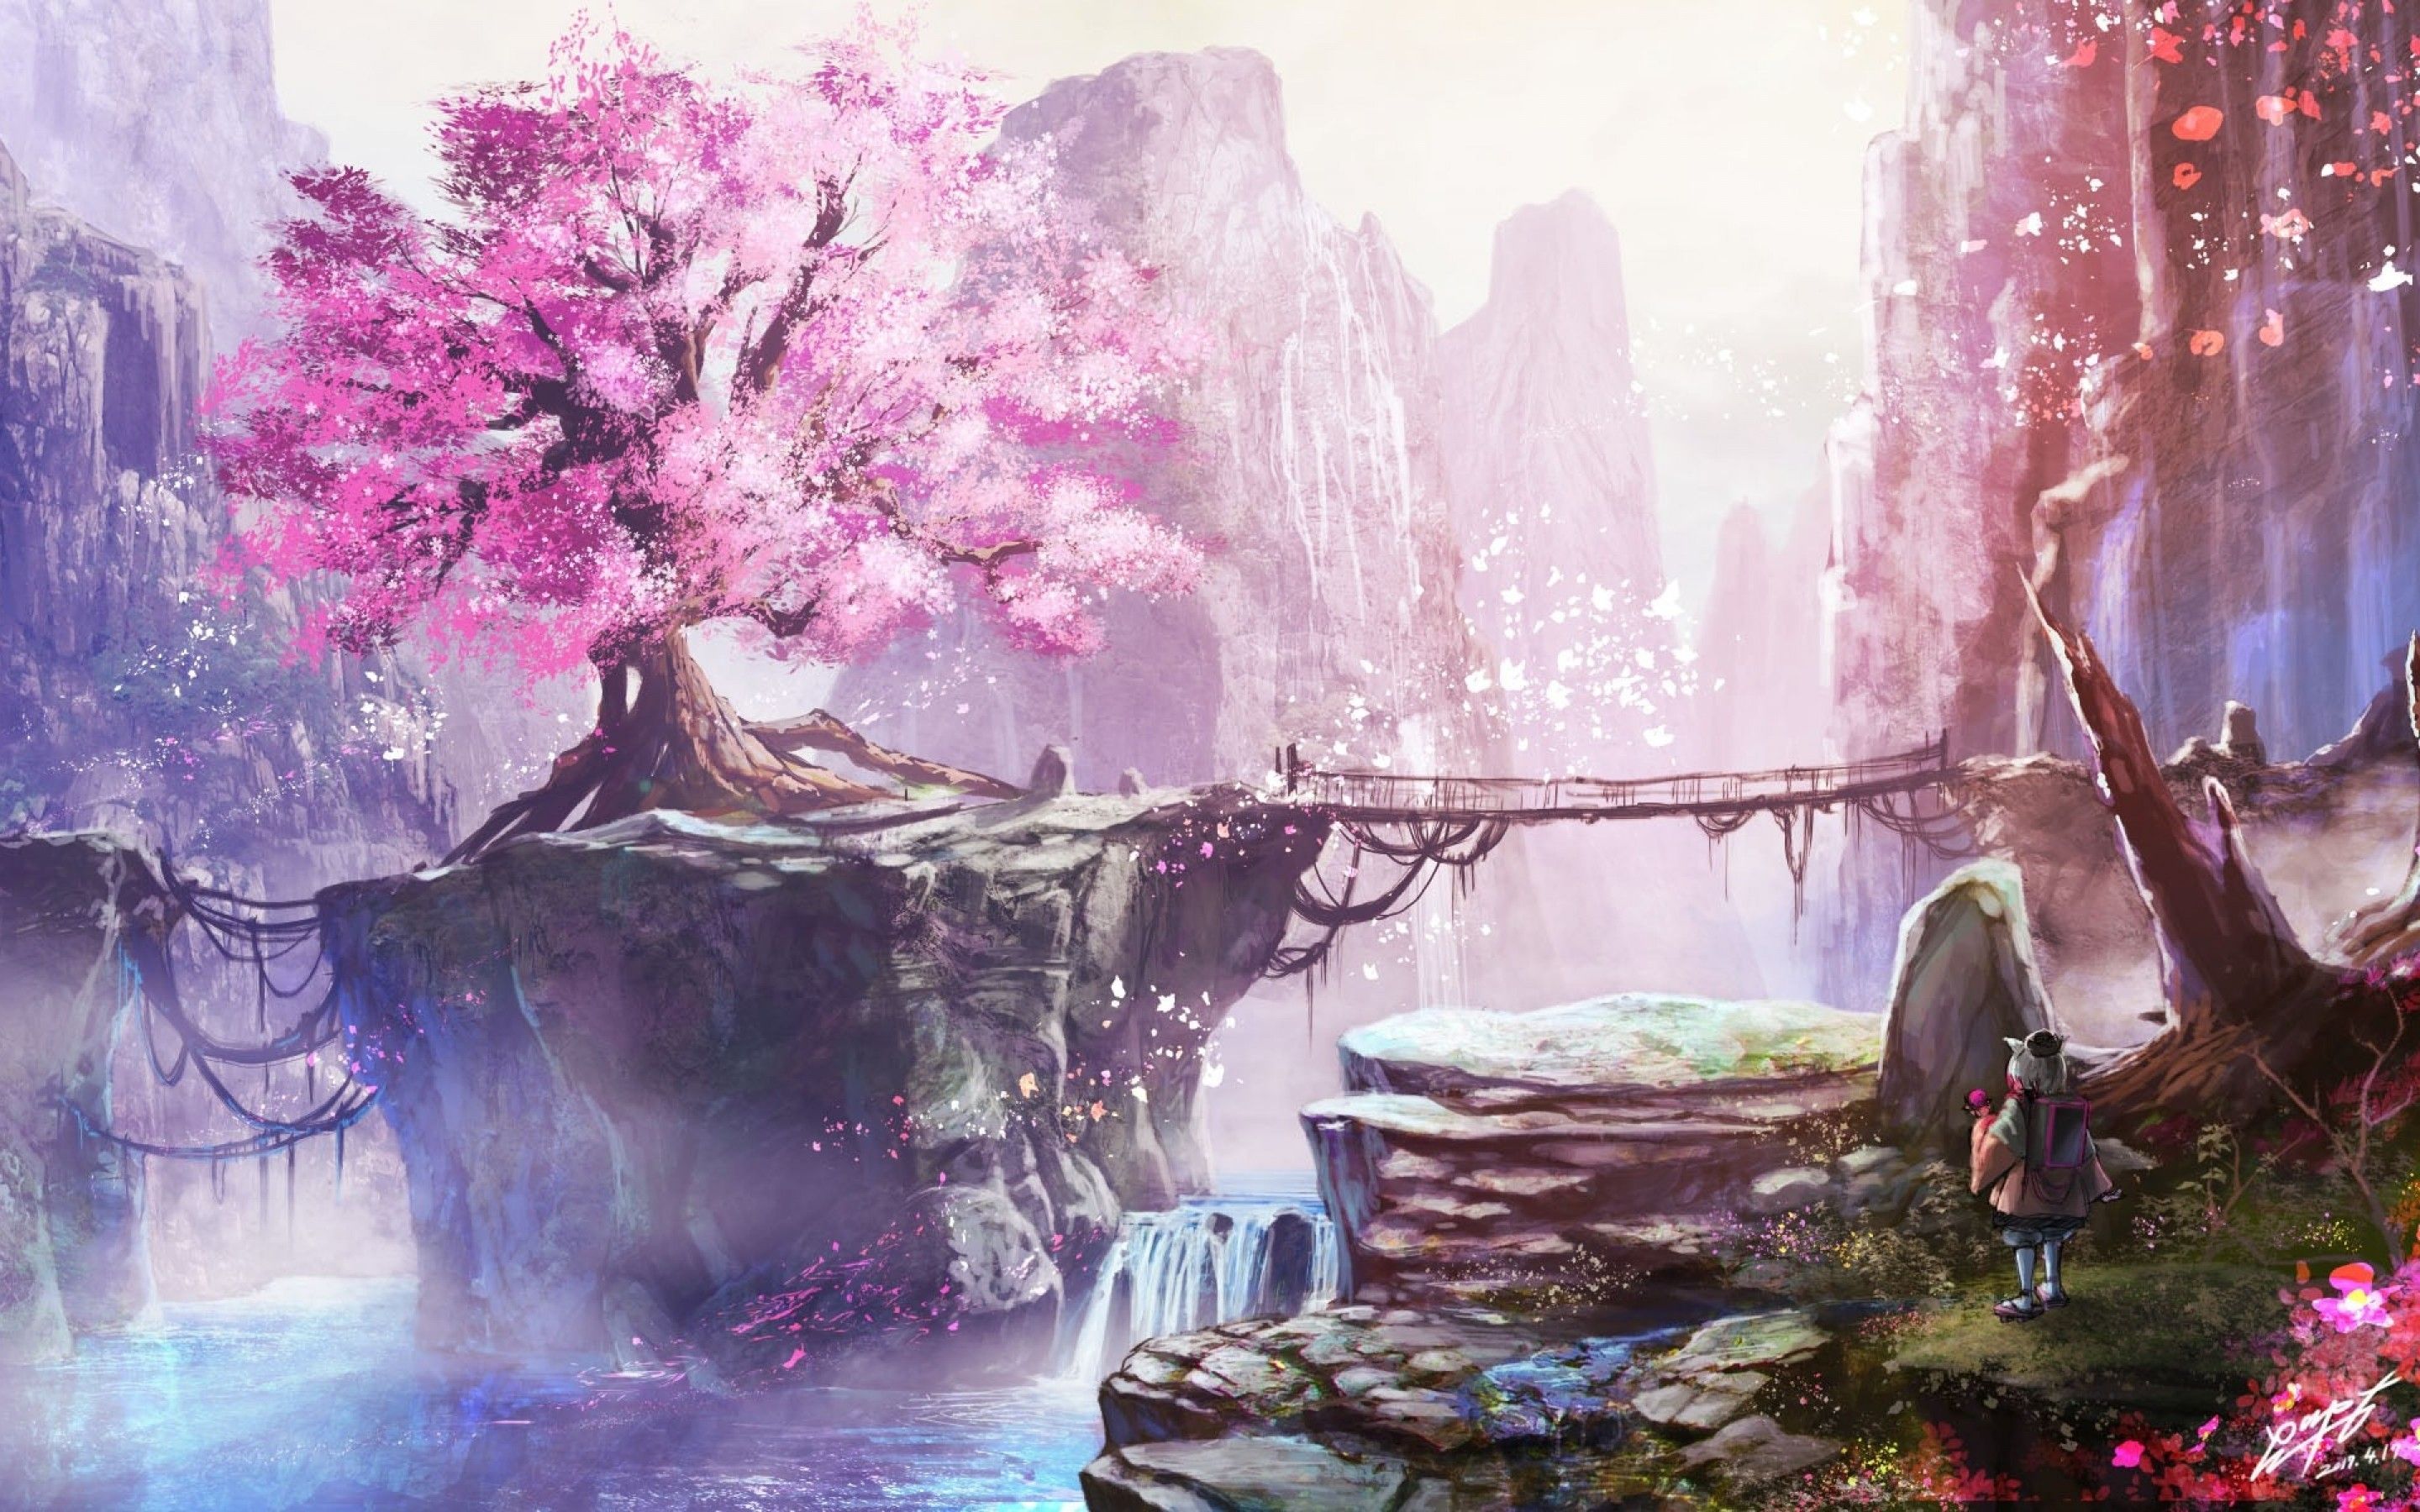 Anime Cherry Blossom Tree #Music #IndieArtist #Chicago. Anime cherry blossom, Cherry blossom wallpaper, Anime scenery wallpaper